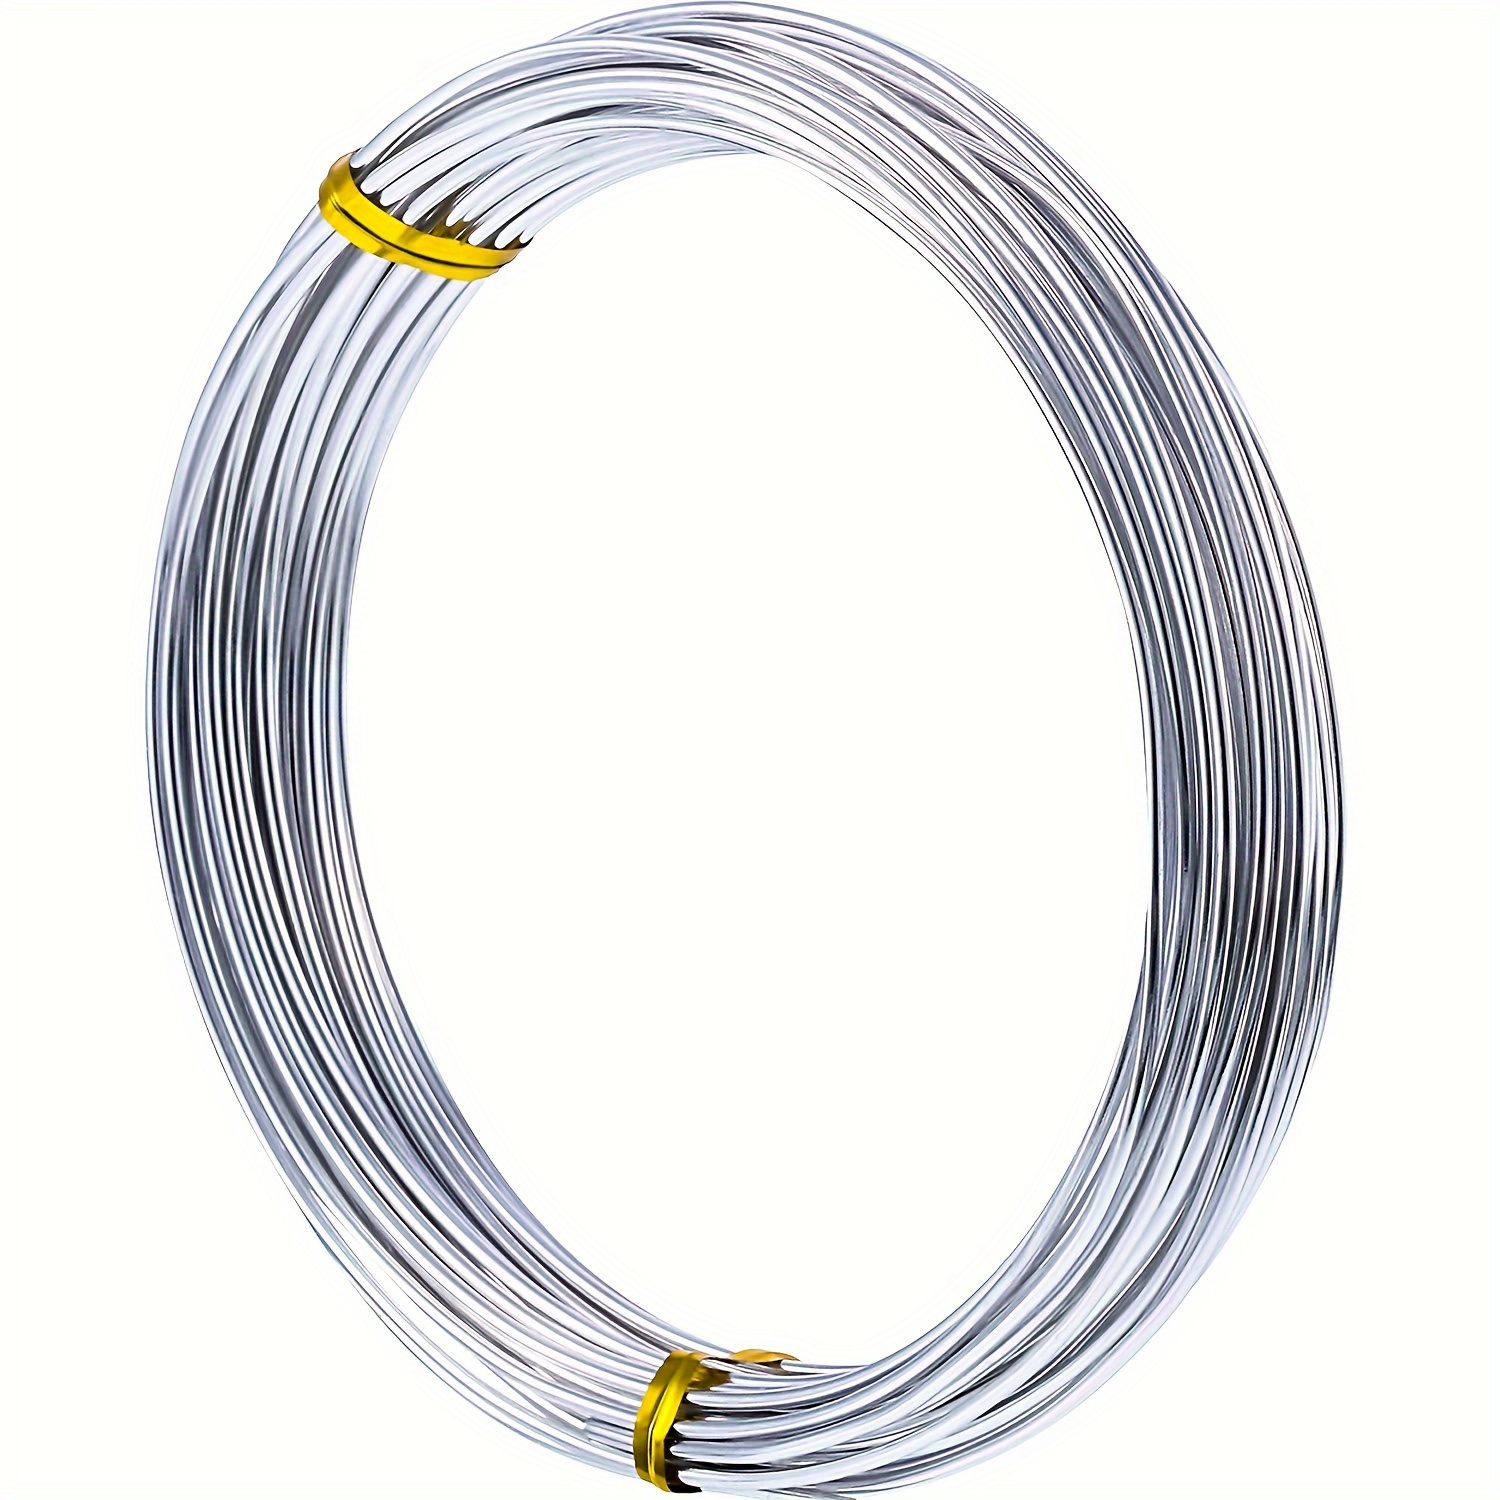 

1pc Aluminum Craft Wire For Sculpting Armature Bendable Craft Wire 10m/393.7inch X 0.8mm For Diy Jewelry Making